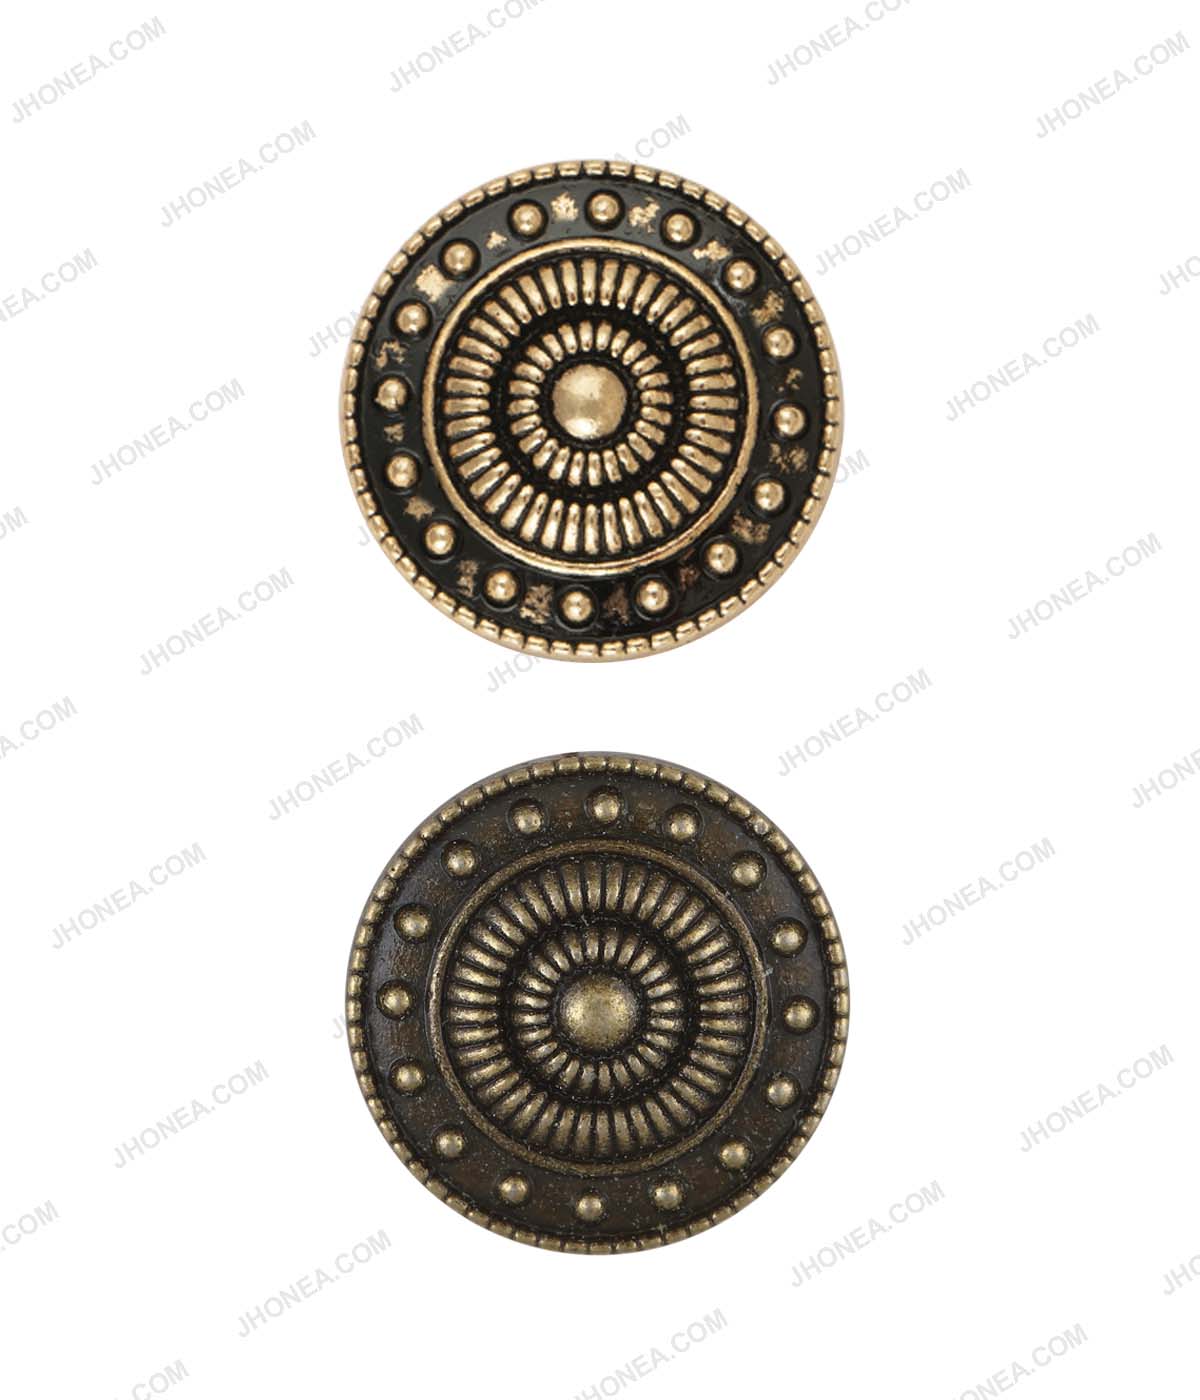 Vintage Looking Antique Brass & Antique Gold Ethnic Buttons